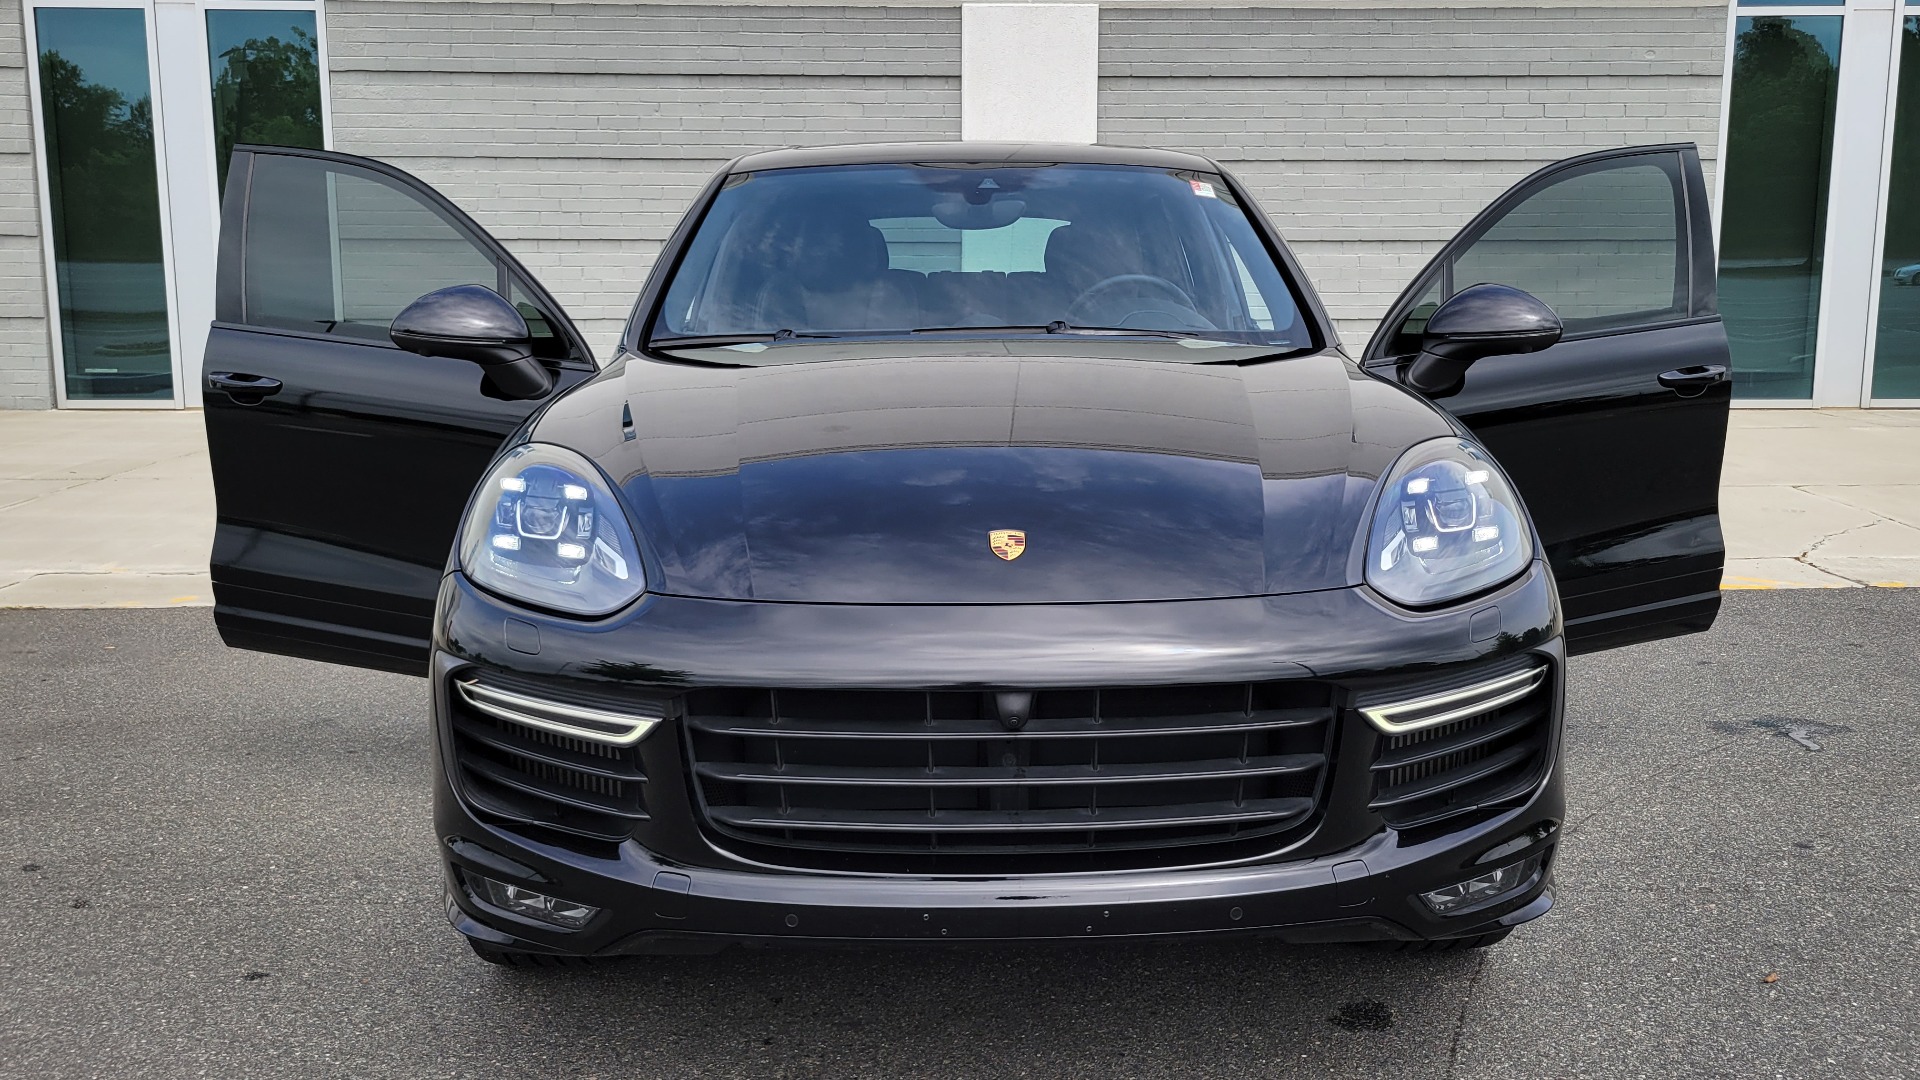 Used 2017 Porsche CAYENNE GTS 3.6L / NAV / SUNROOF / BOSE / PARK ASST / LCA / CAMERA for sale $64,995 at Formula Imports in Charlotte NC 28227 10